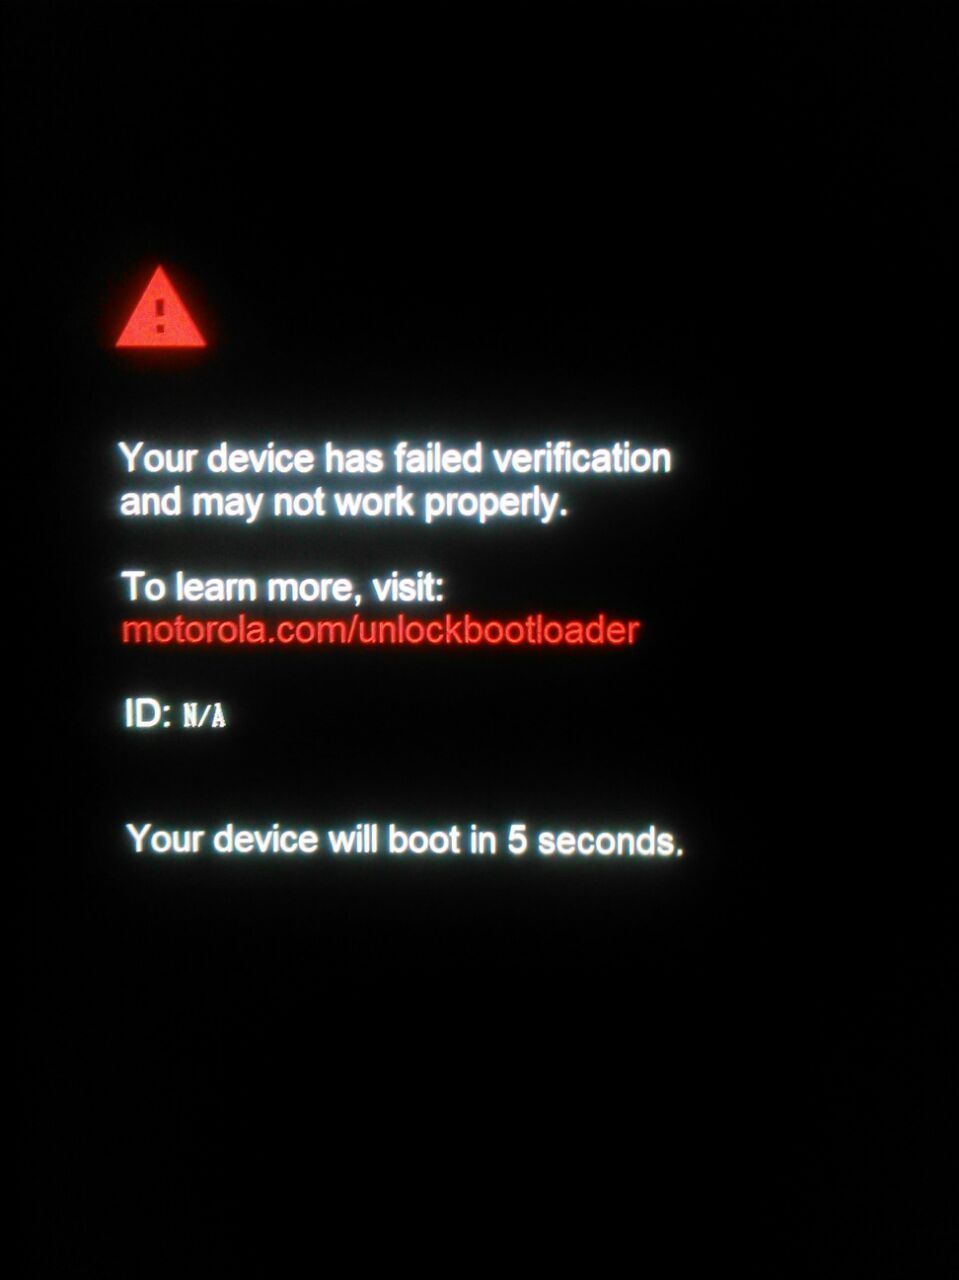 Device verification failed. Your device. Ошибка your device has failed verification and May not work properly. Хуавей your device has failed verification. Хонор ошибка.